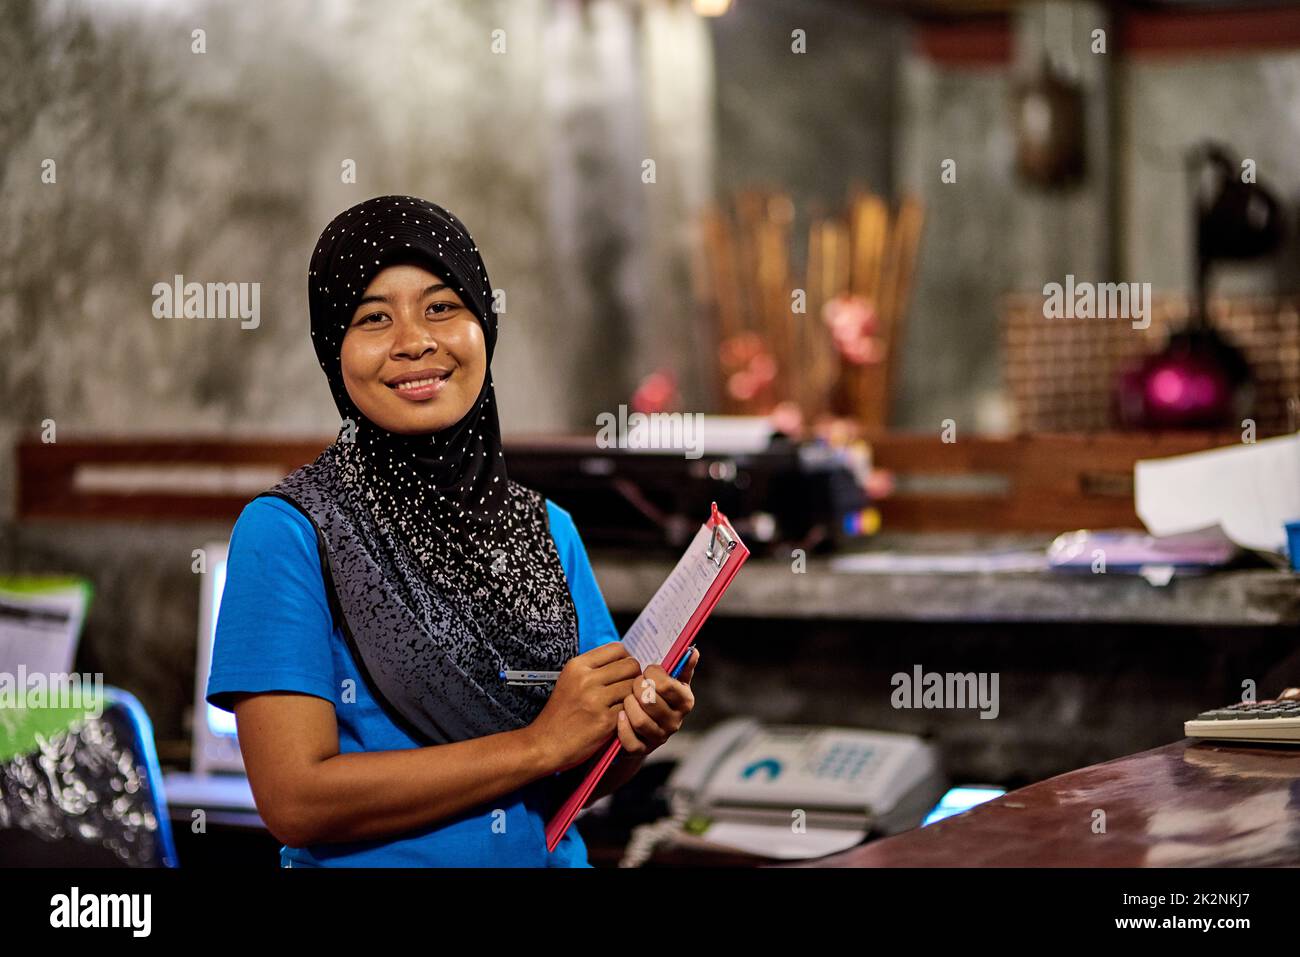 Youre always welcome here. Portrait of a smiling muslim thai woman standing behind a hotel reception desk holding a clipboard. Stock Photo